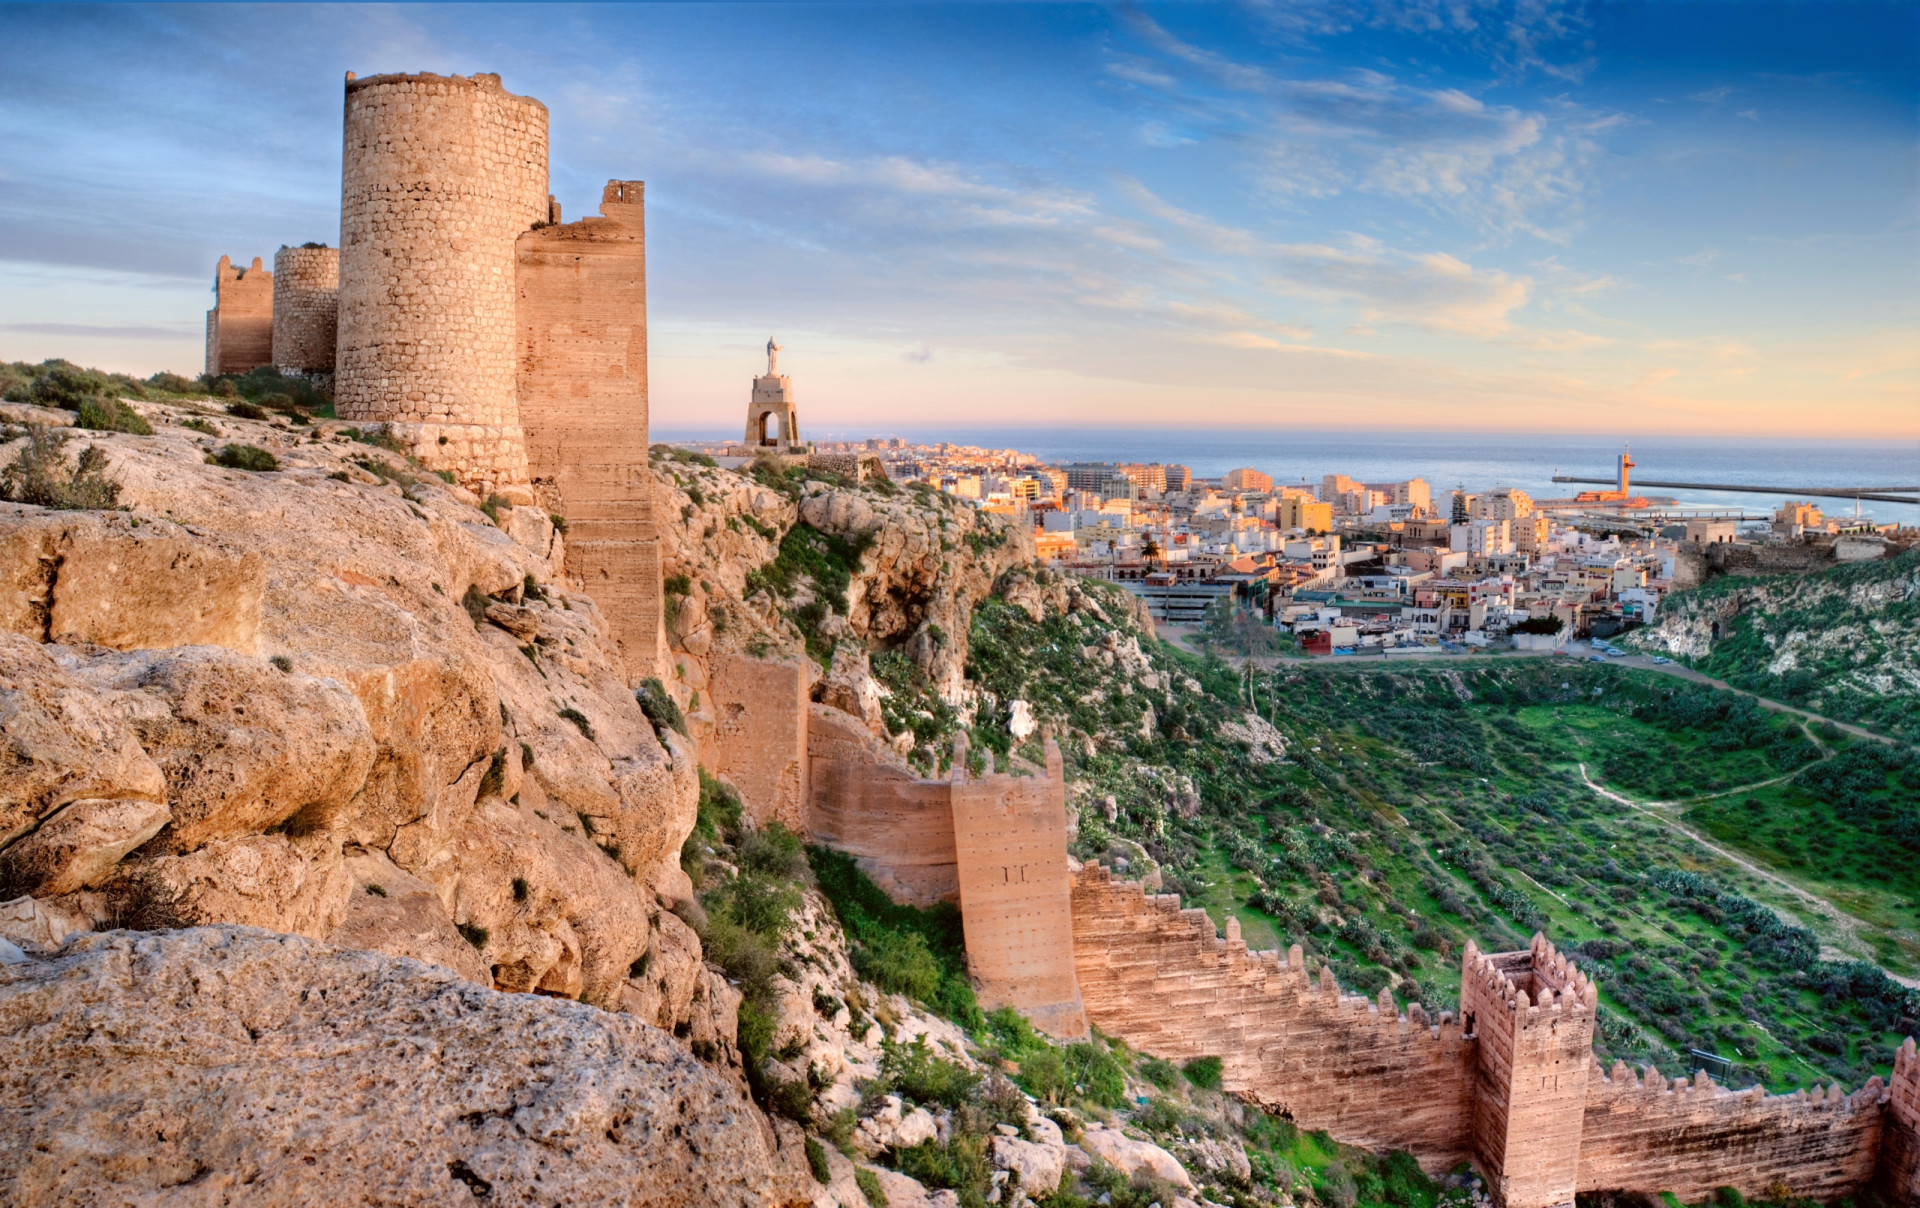 <p>Sights to see include the 10th-century Alcazaba of Almería, a defensive citadel that looms large over the modern city.</p><p>You may also like:<a href="https://www.starsinsider.com/n/411996?utm_source=msn.com&utm_medium=display&utm_campaign=referral_description&utm_content=570754en-en"> Bruce Lee: from martial artist to Hollywood star</a></p>